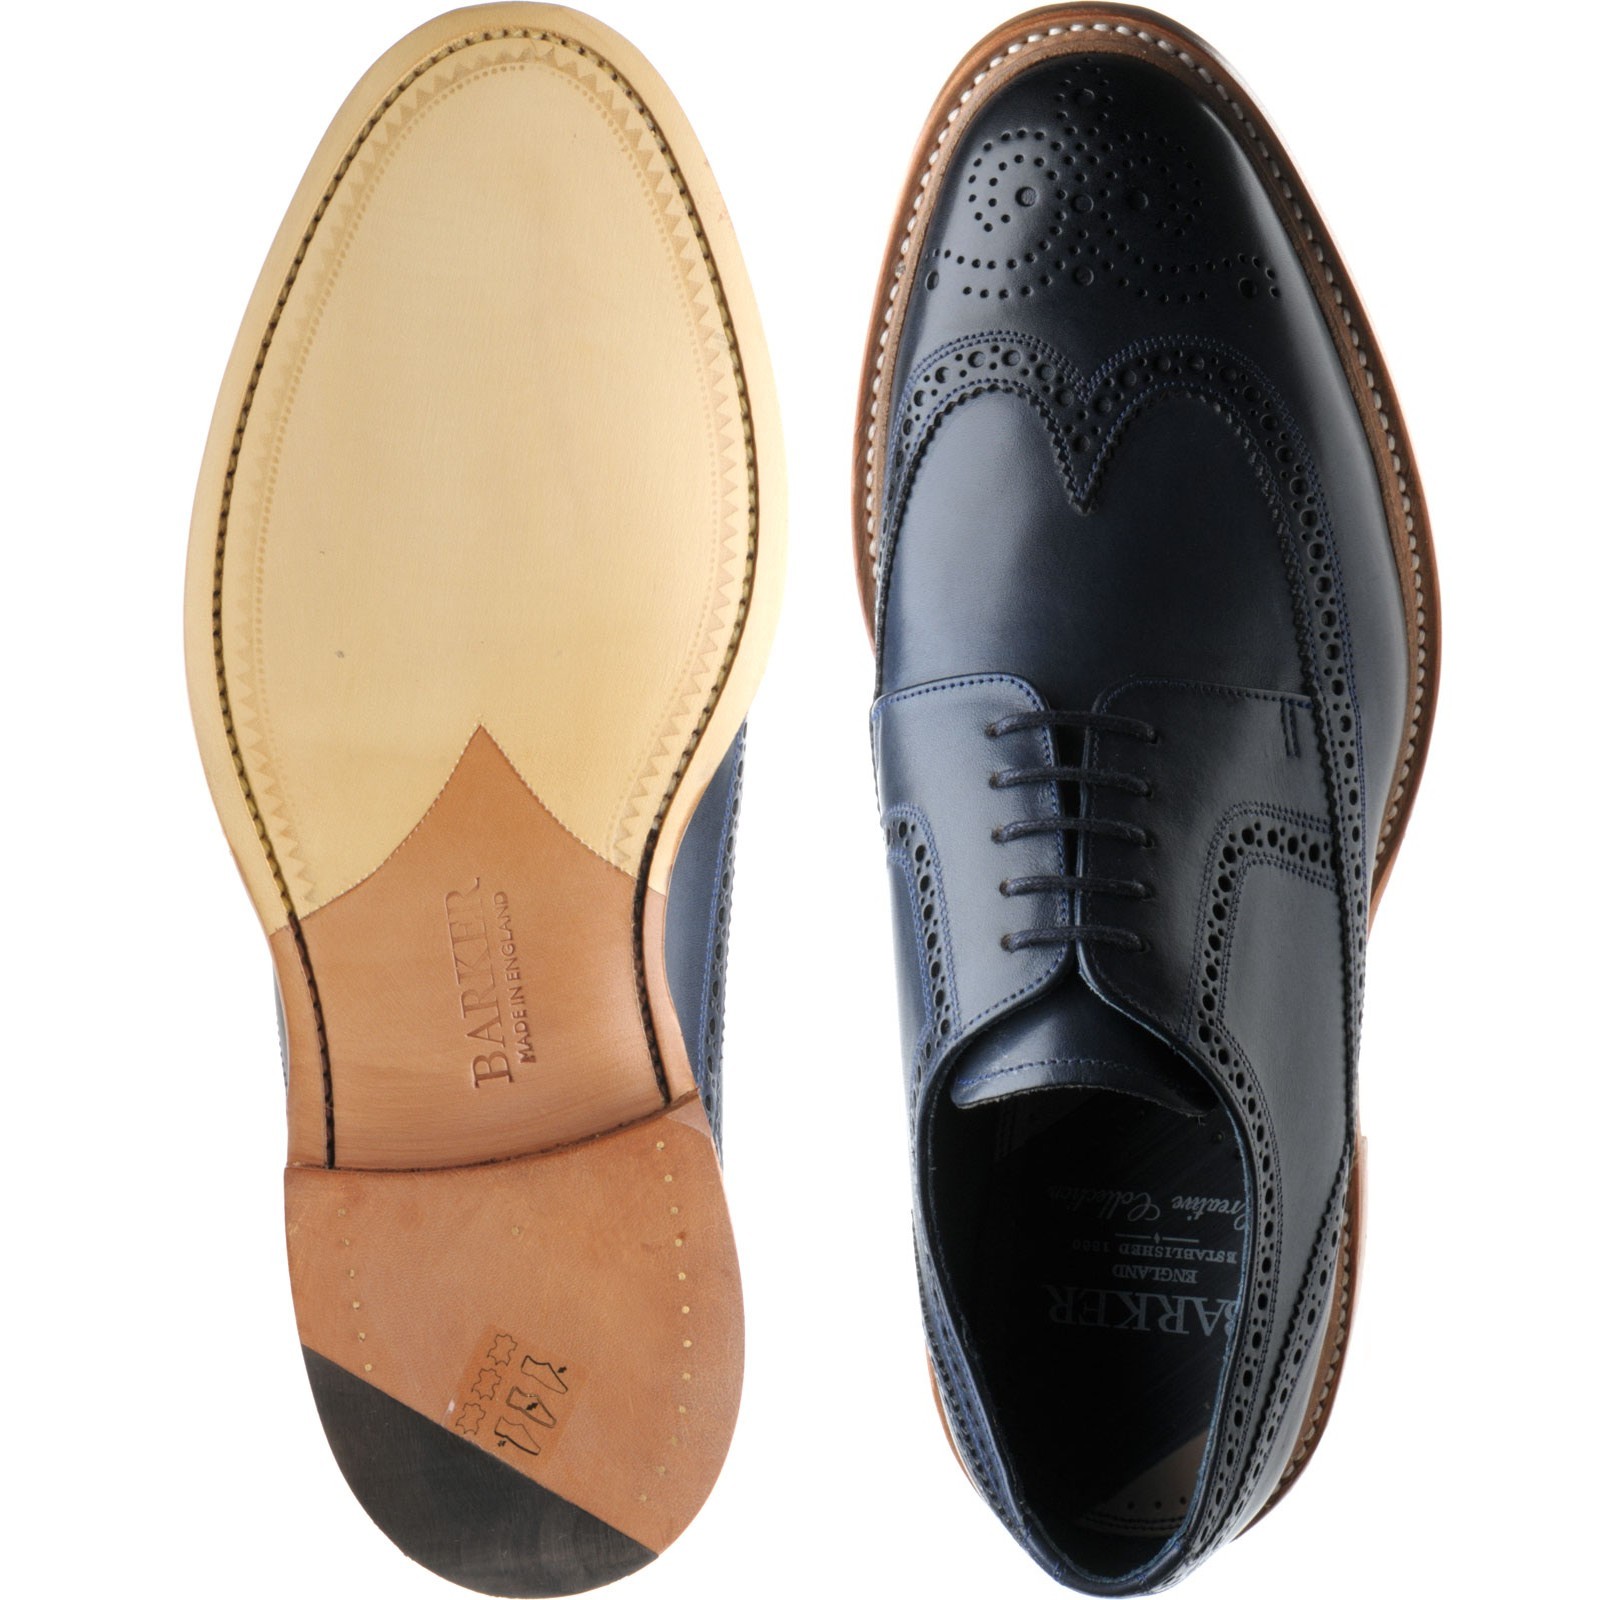 Barker shoes | Barker Creative | Bailey II brogues in Navy Hand Painted ...